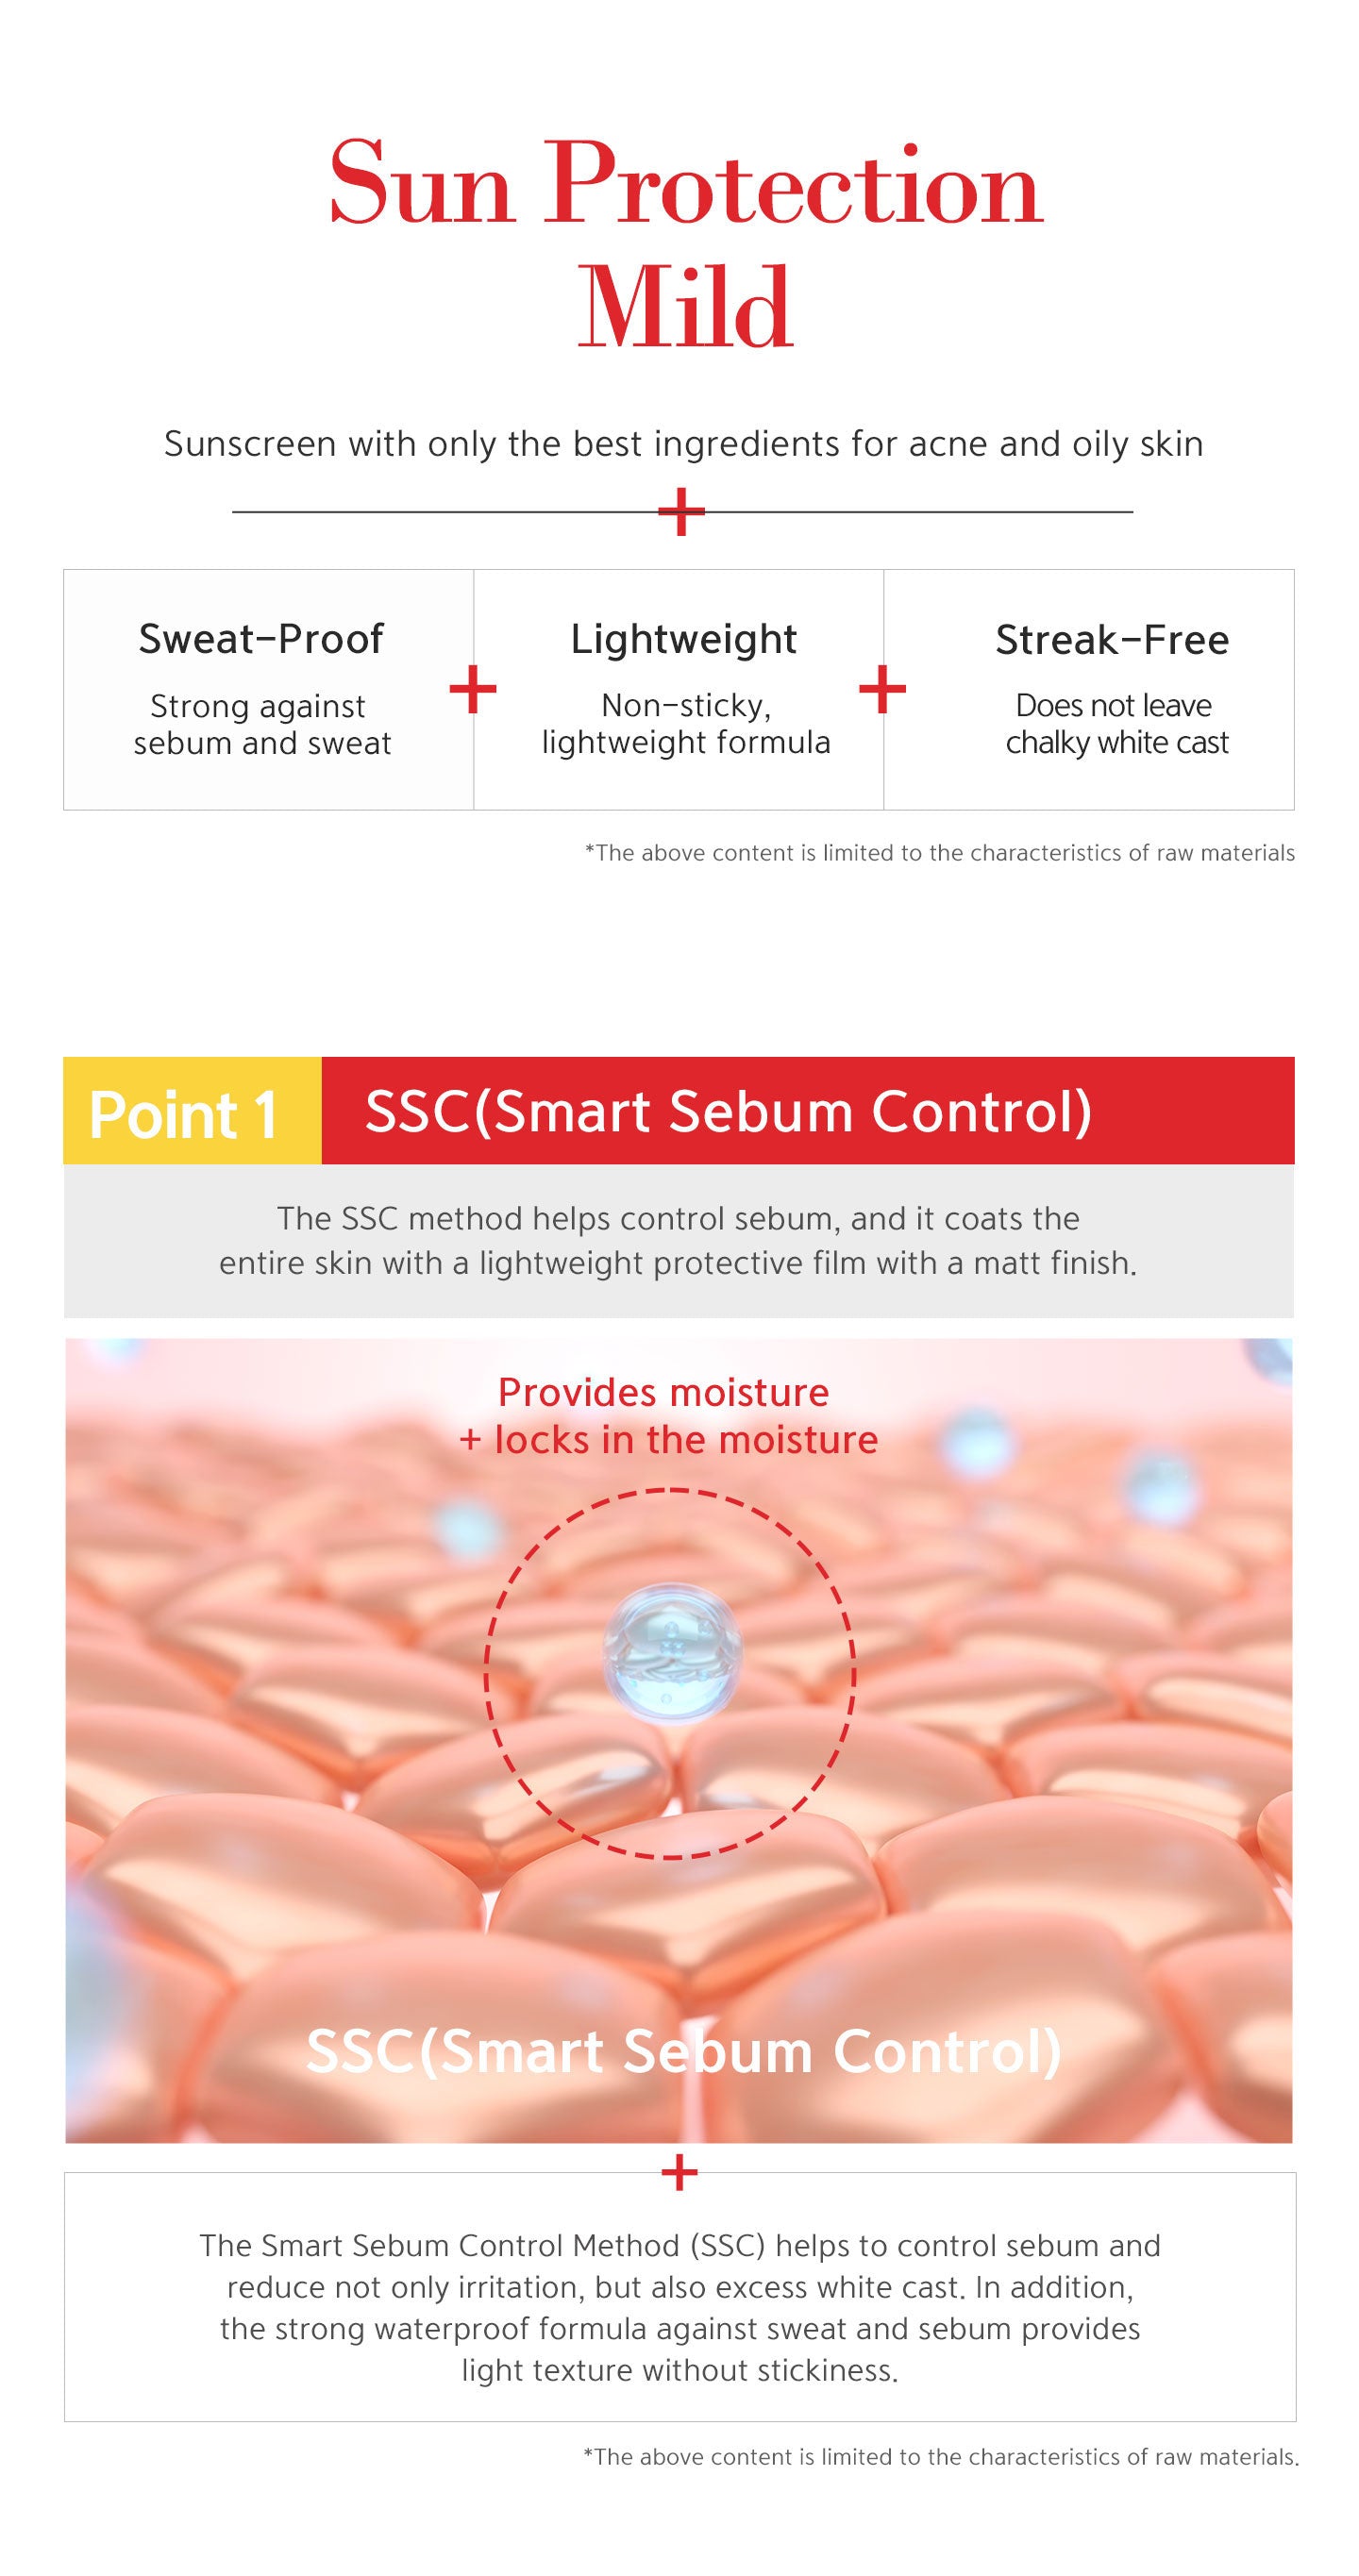 The smart sebum control method helps to control sebum and reduce not only irritation, but also excess white cast. In addition, the strong waterproof formula against sweat and sebum provides light texture without stickiness. 